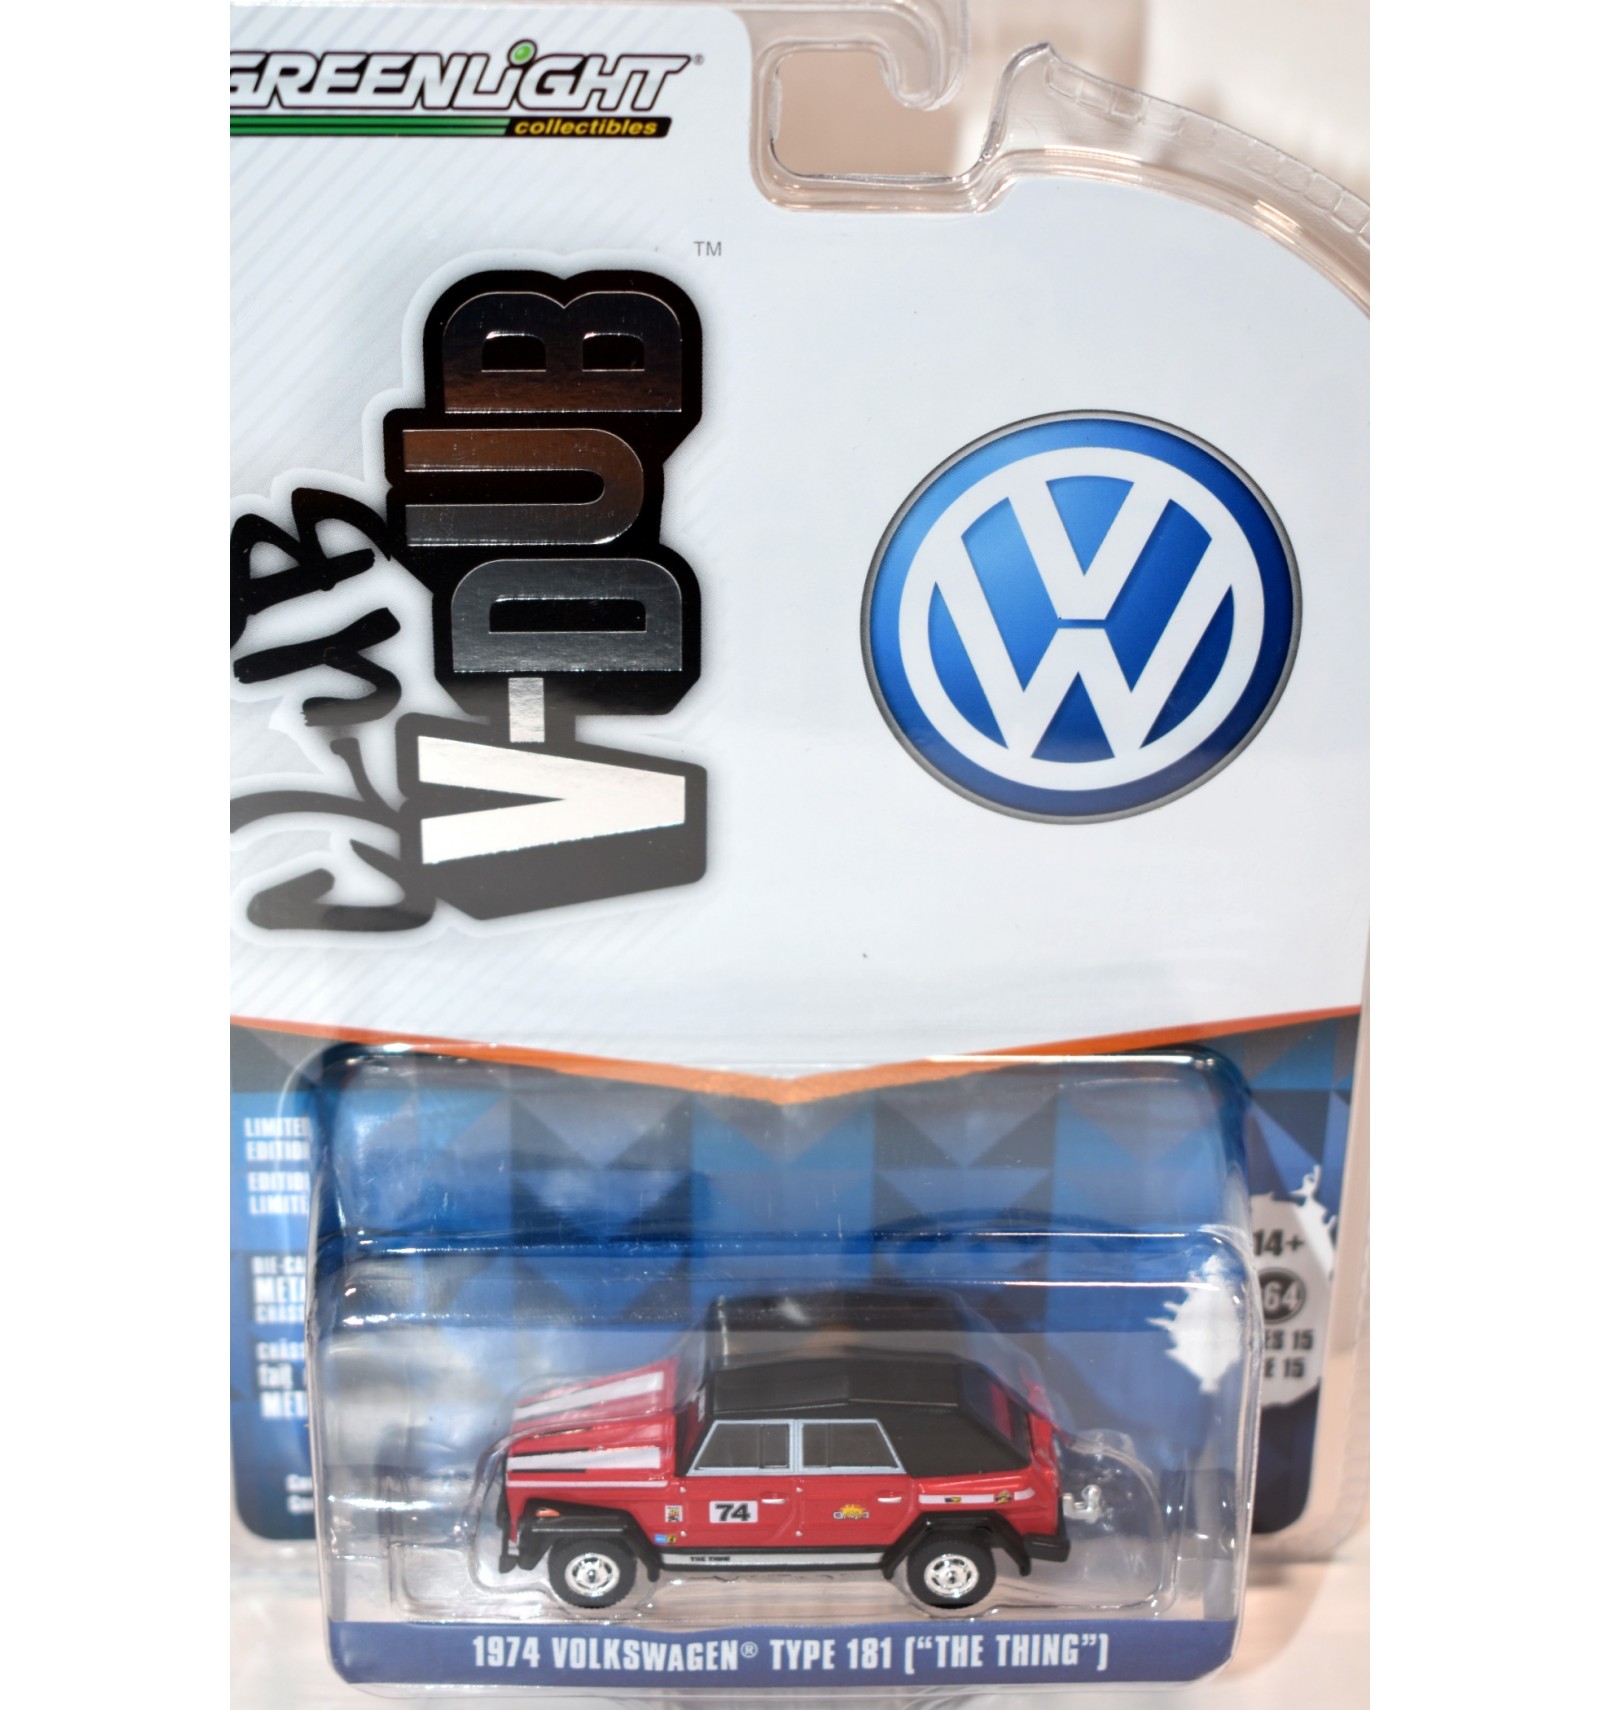 Greenlight - Club V-Dub - 1974 Volkswagen Type 181 - The Thing - Global ...